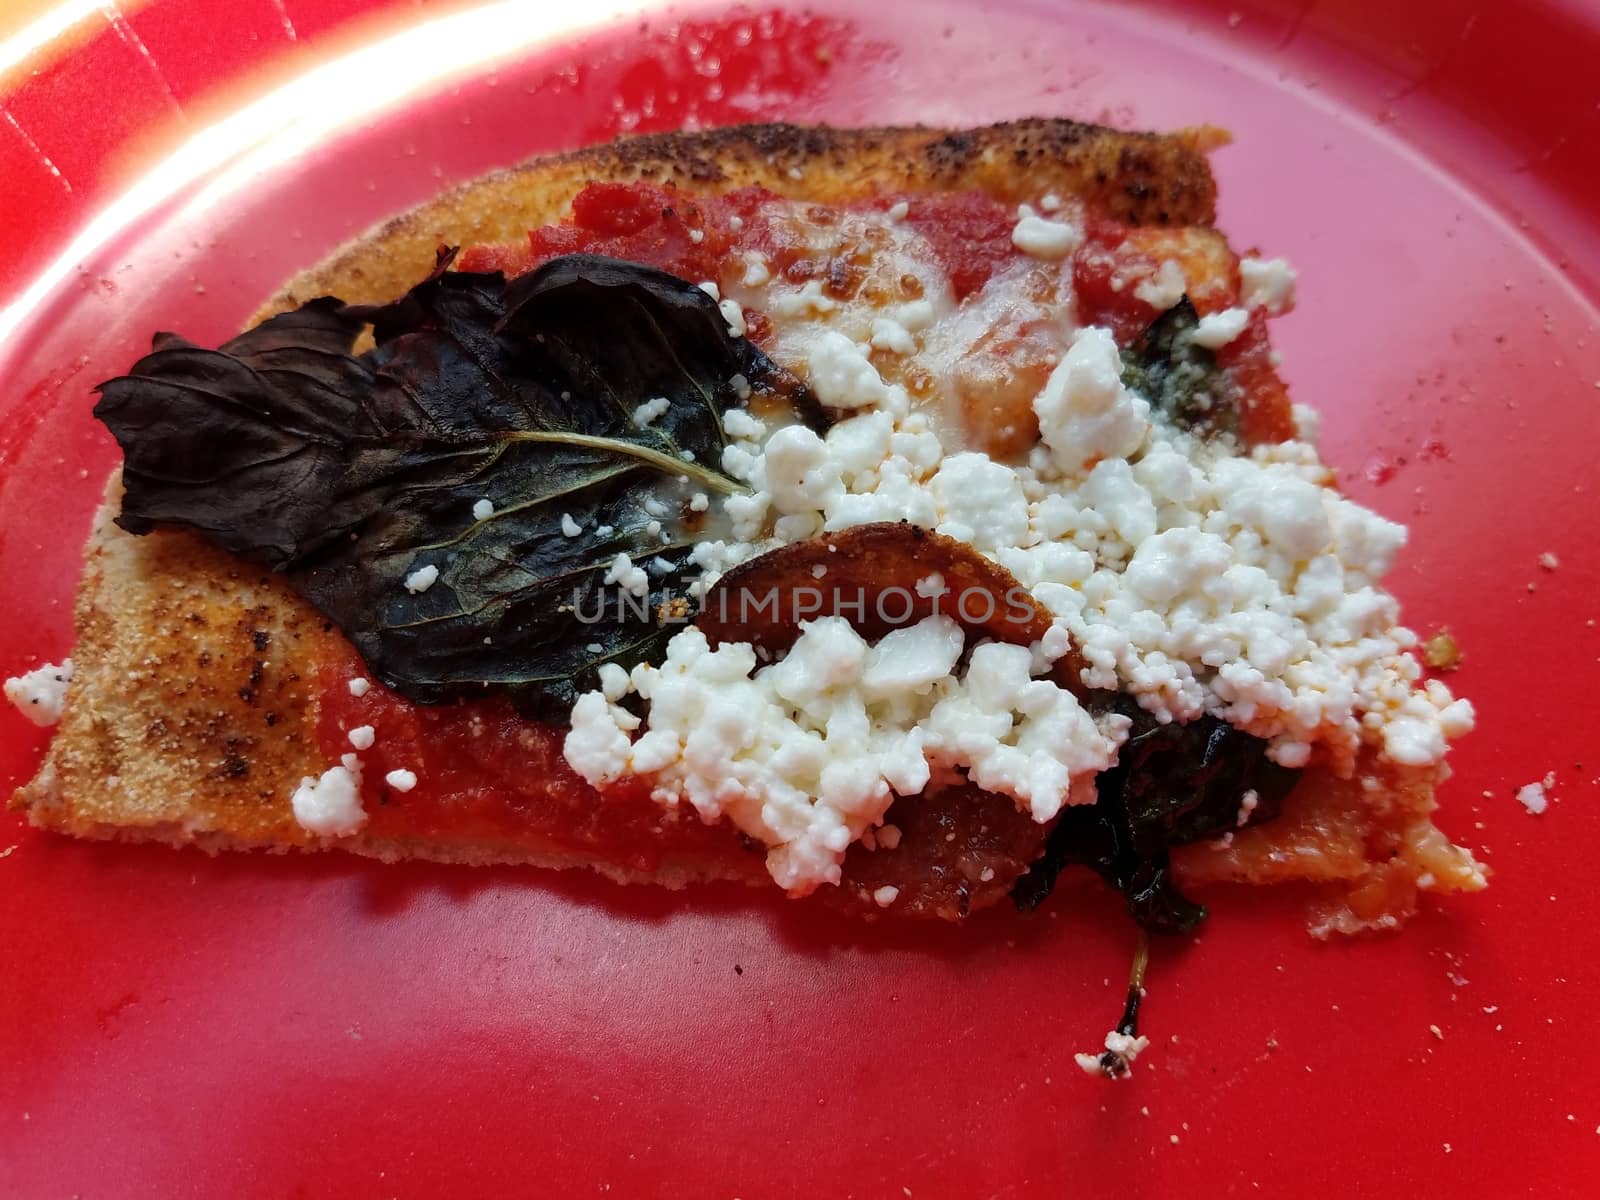 basil and goat cheese on slice of pizza on red plate by stockphotofan1